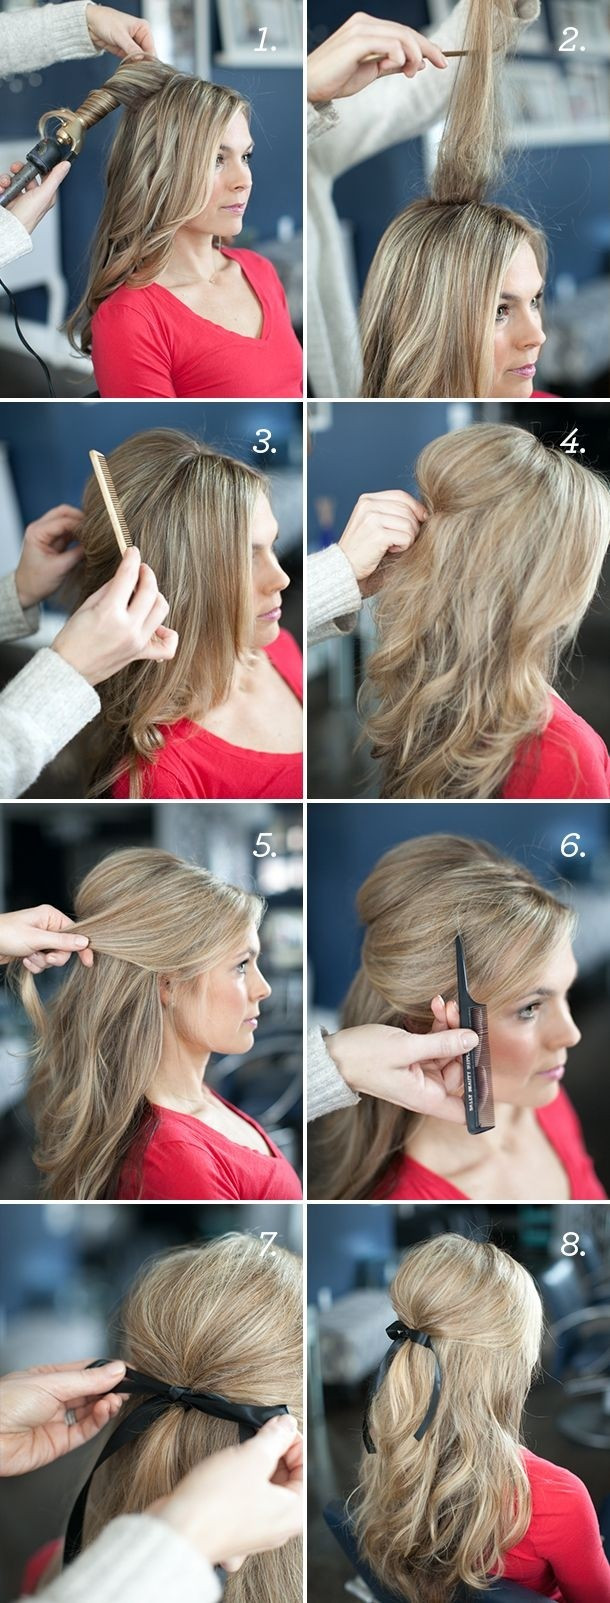 Easy Bridesmaid Hairstyles For Long Hair
 12 Hottest Wedding Hairstyles Tutorials for Brides and